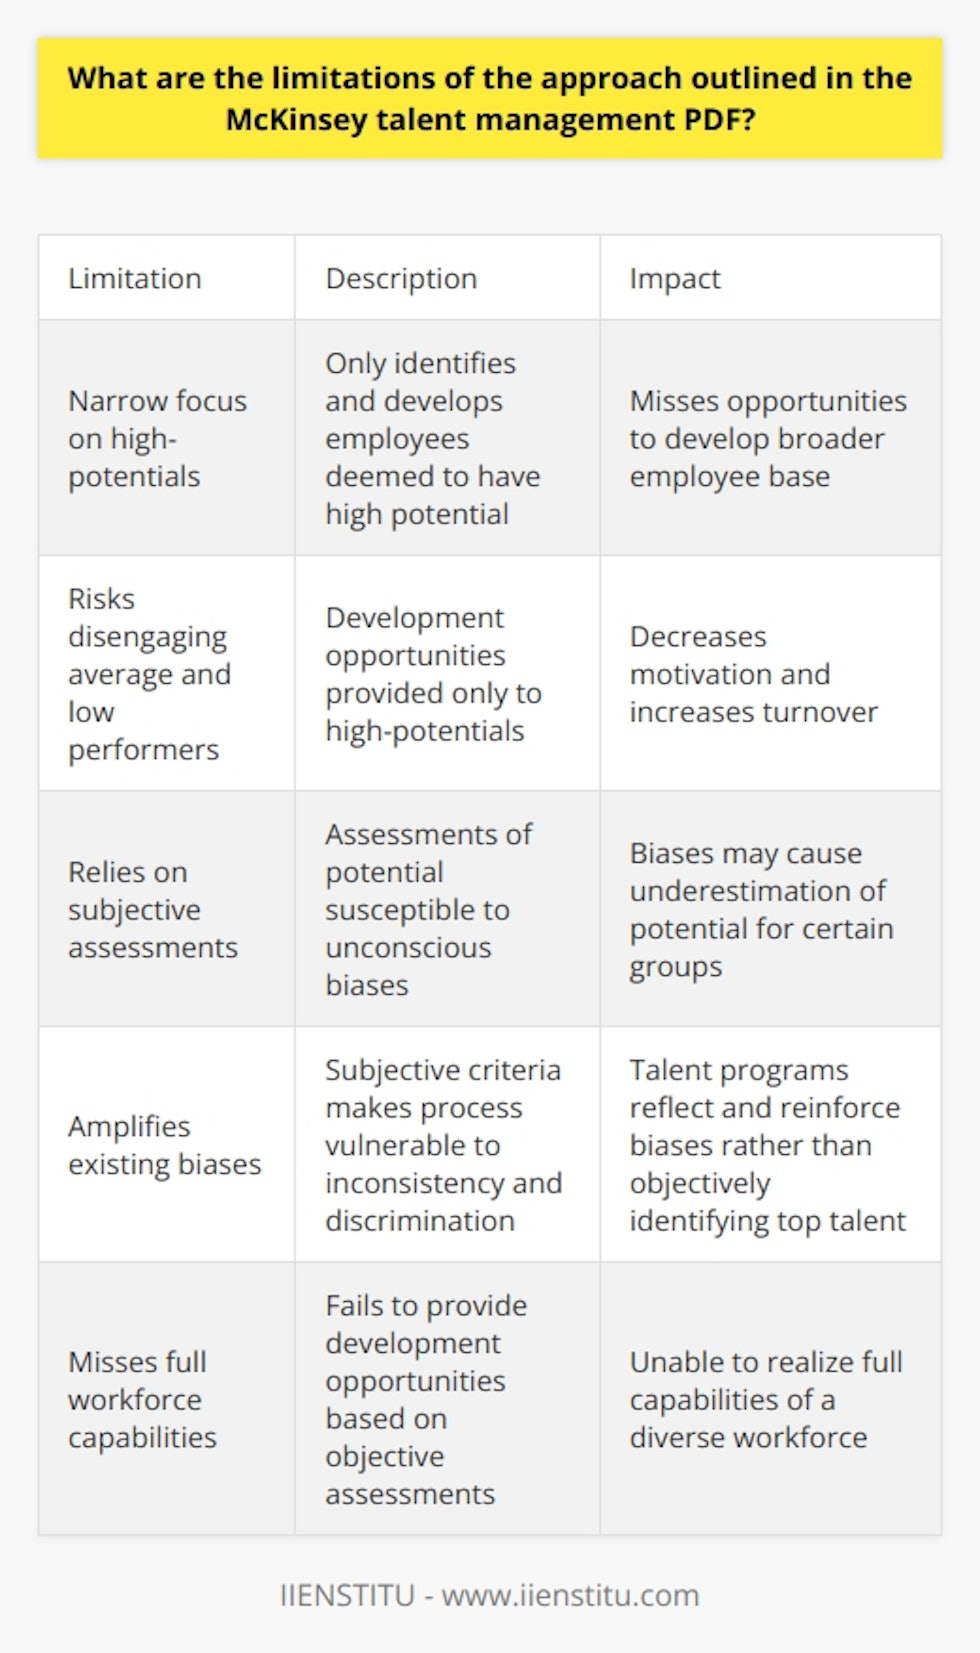 Here is a detailed content on the limitations of McKinsey's talent management approach:McKinsey's talent management approach, as outlined in their PDF report, has a narrow focus on identifying and developing high-potential employees rather than taking a more inclusive approach to developing all employees. This exclusive focus on high-potentials has several limitations:- It risks disengaging average and low performers by providing development opportunities only to those deemed to have high potential. This can decrease motivation, increase turnover, and limit the organization's overall capability.  - It relies heavily on subjective assessments of potential by managers and other decision makers. However, research shows unconscious biases often influence performance ratings and promotion decisions. Managers may underestimate the potential of certain groups based on factors like gender, race, age, or cultural background.- By concentrating only on high-potentials, organizations miss opportunities to improve performance more broadly across the employee base. An inclusive approach would provide development opportunities for all employees to help realize their full potential.- Subjective assessment of potential introduces risks that talent management programs will reflect and amplify biases rather than objectively identifying top talent. Relying on subjective criteria makes the process vulnerable to inconsistency and discrimination.In summary, the exclusive focus on high-potentials and reliance on subjective assessments of potential are two significant limitations of McKinsey's talent management approach. Organizations would benefit from a more inclusive strategy that provides development opportunities for all employees based on objective assessments of performance and potential. Further research is needed to design talent management programs that realize the full capabilities of a diverse workforce.